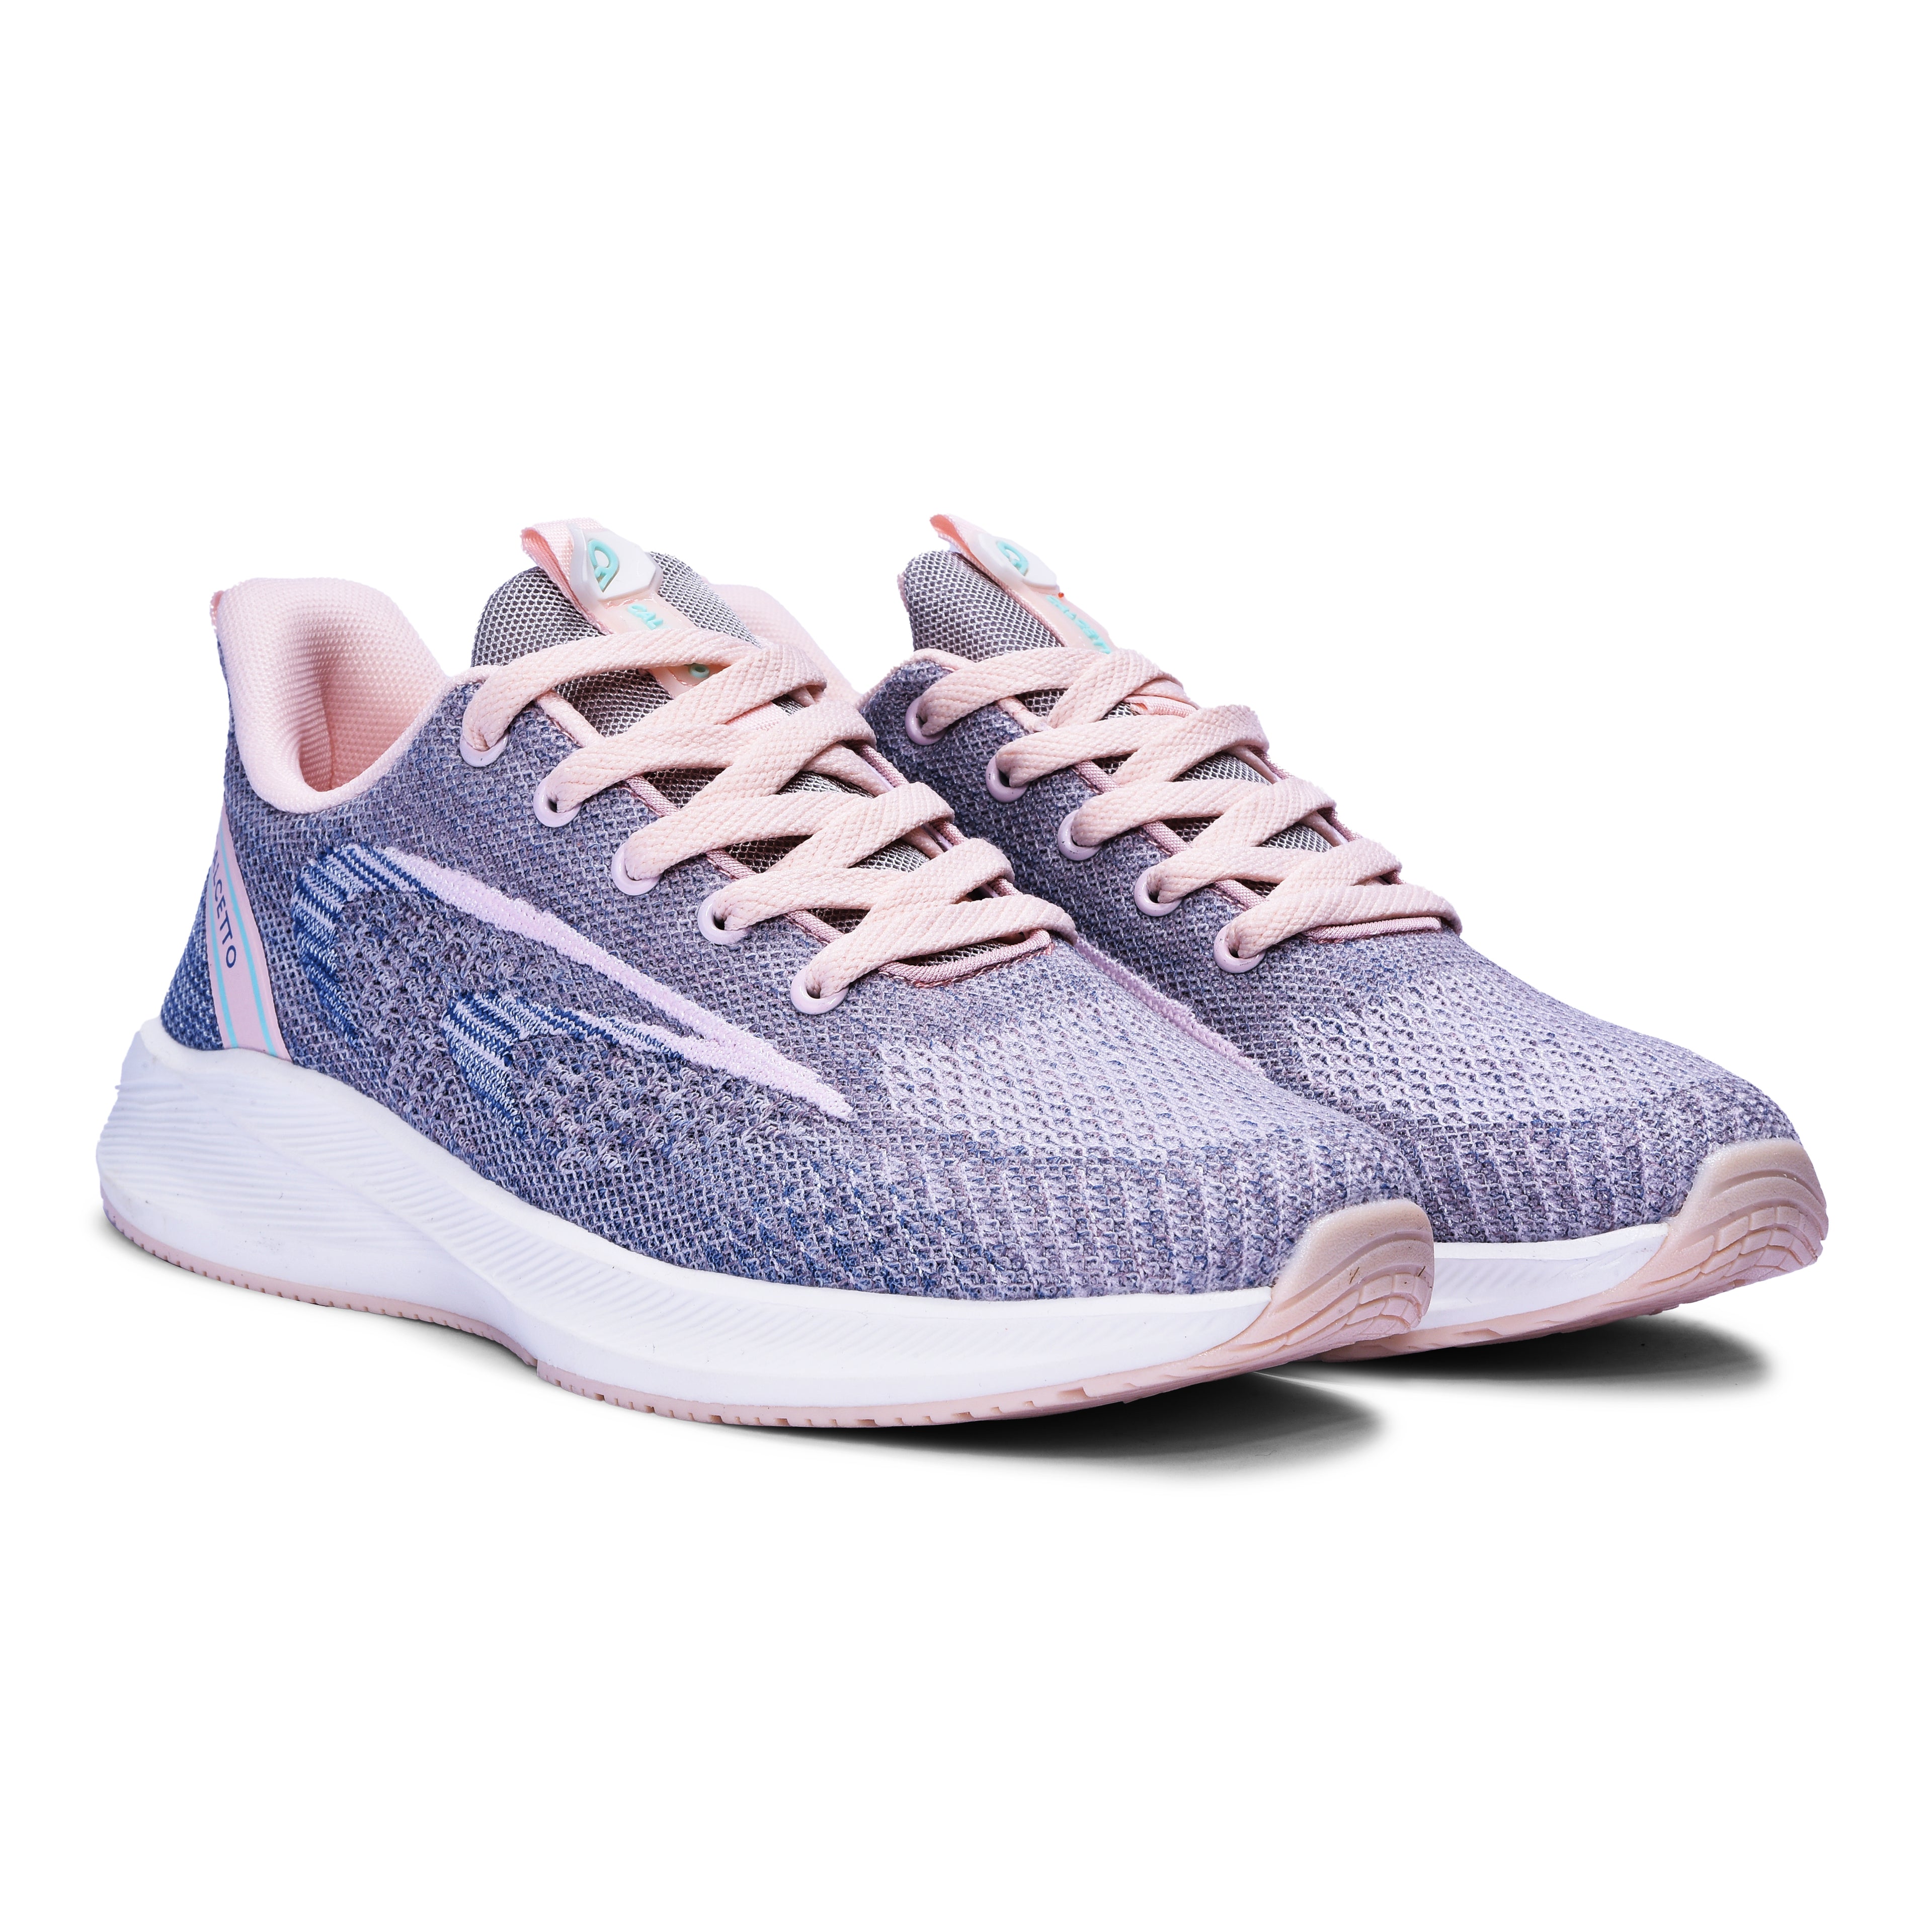 Calcetto CLT-9823 D Grey Peach Running Shoe For Women – Vision